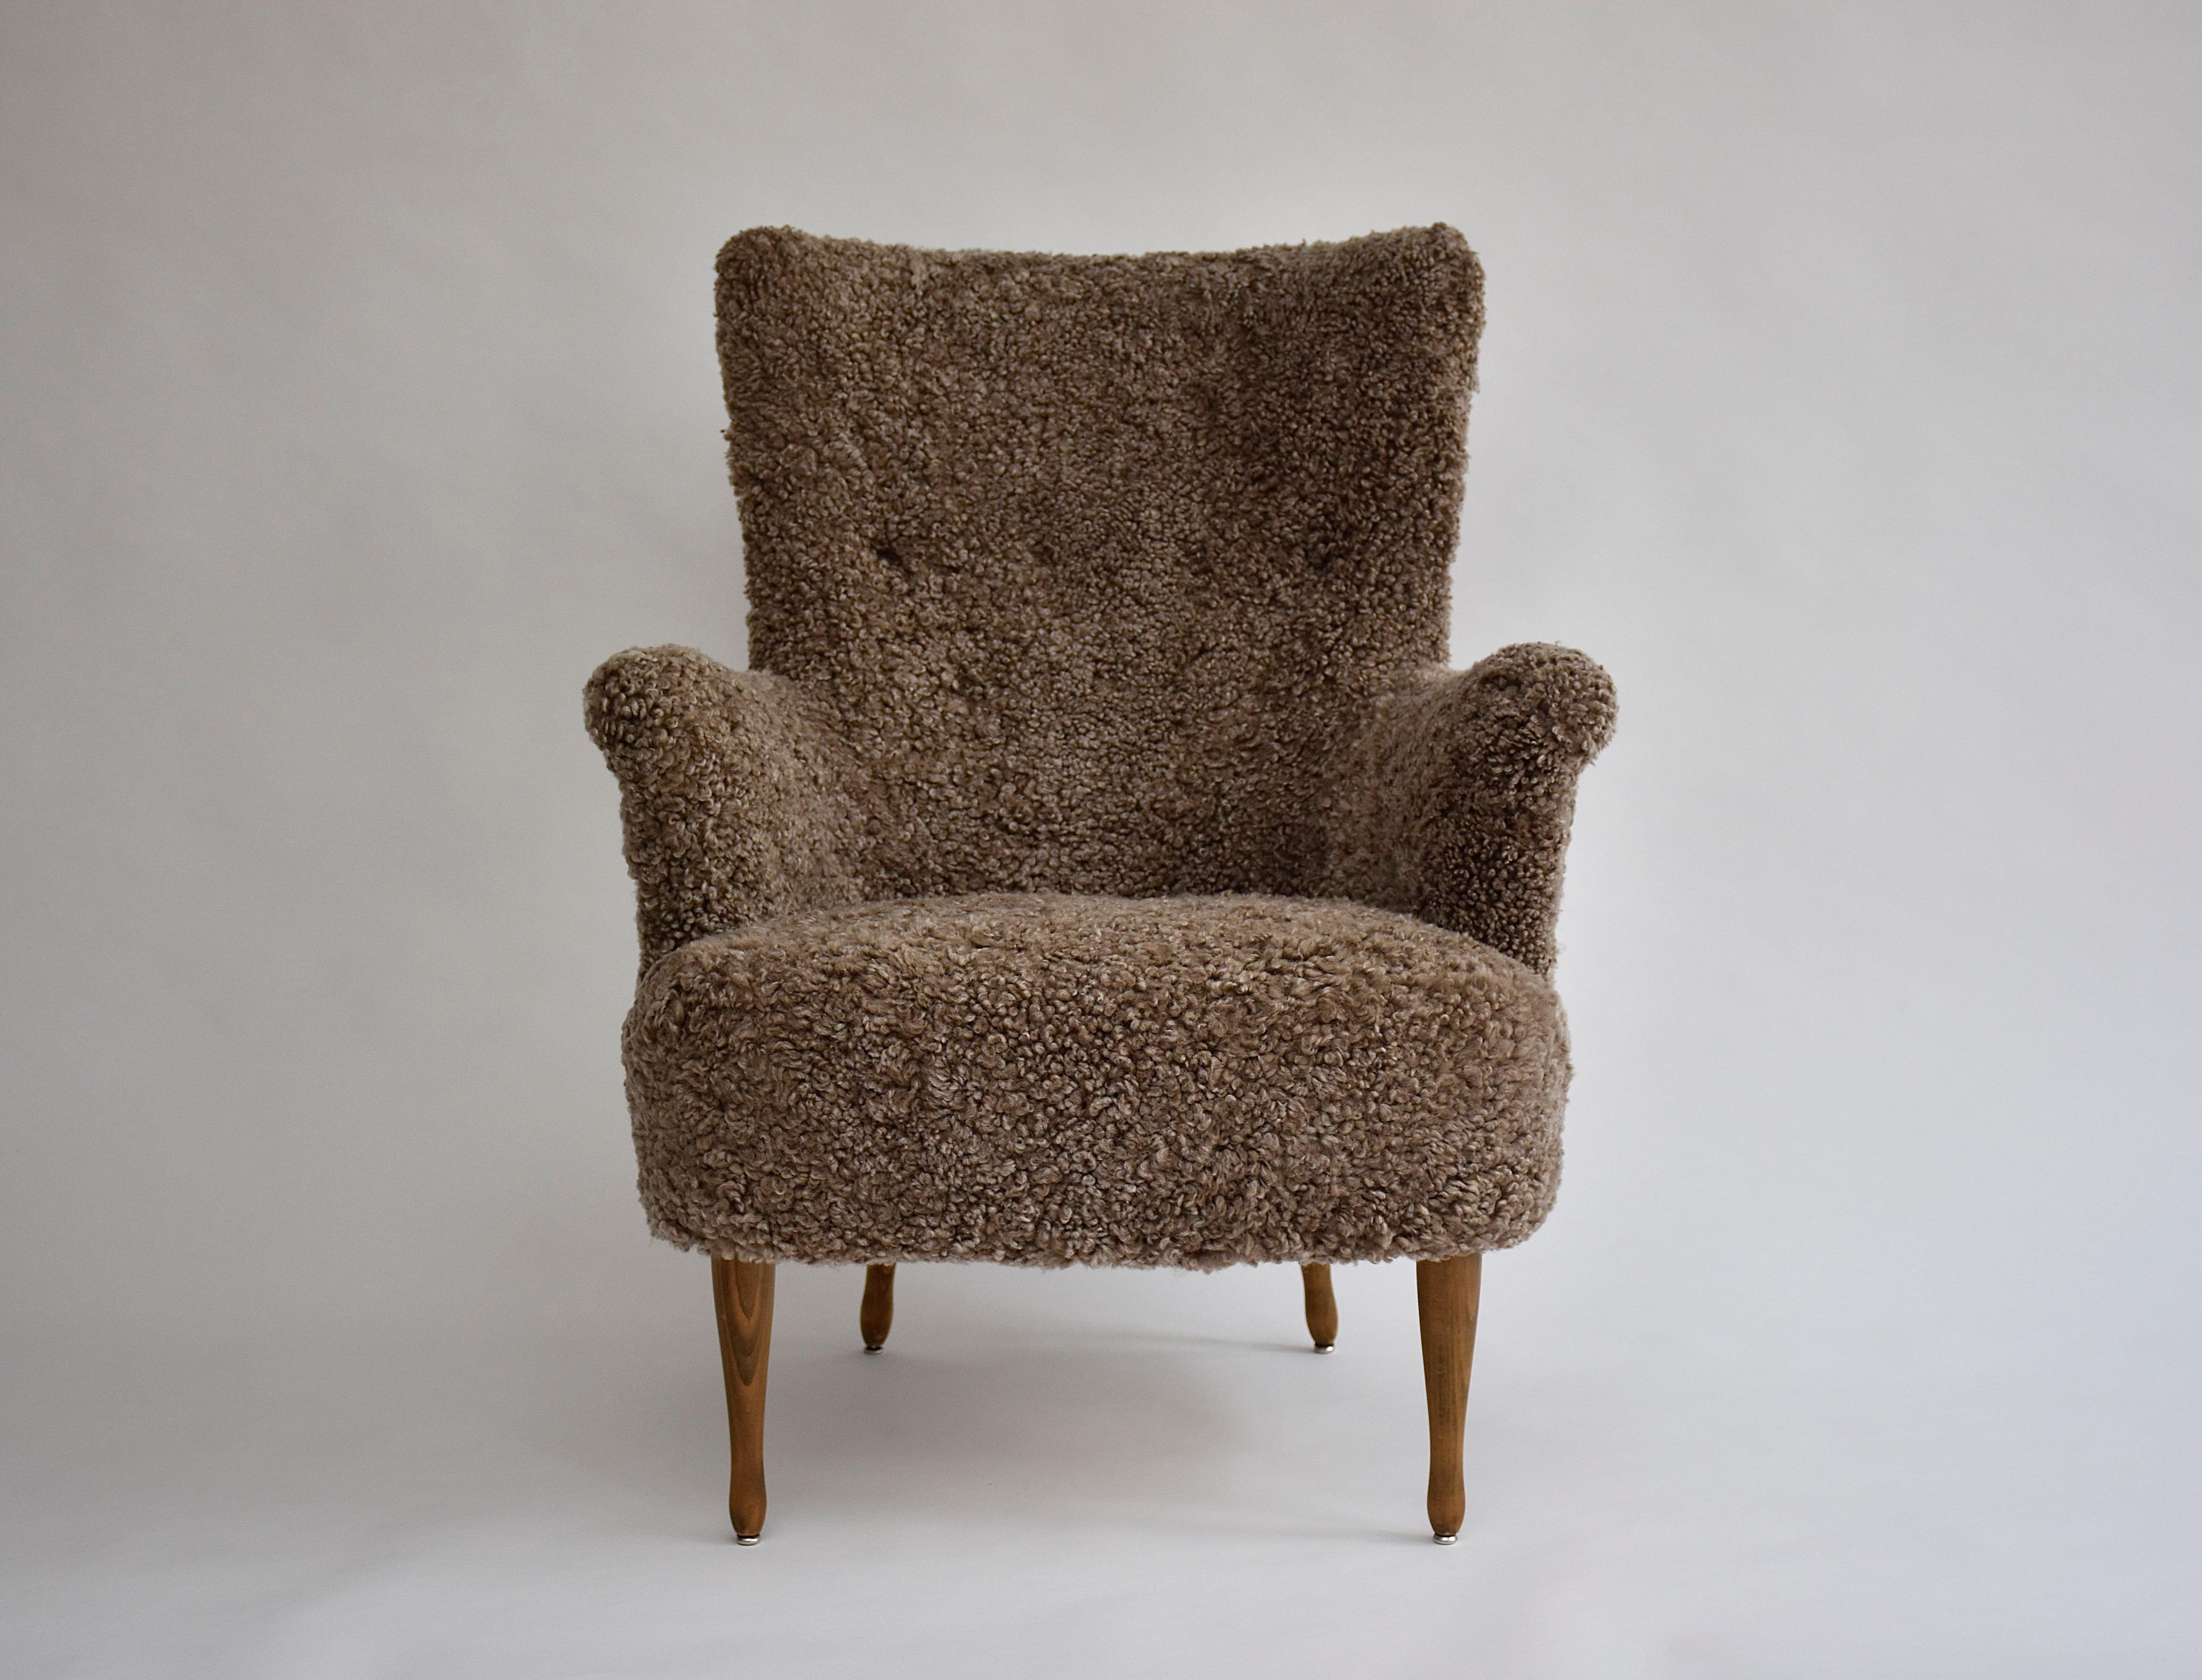 A stunning armchair by the famous furniture designer- Carl Malmsten.
This iconic chair provides great comfort and is of enduring quality. 
Back tufted by buttons, elegant arm curves and wooden legs. 
New soft upholstery in grey/brown